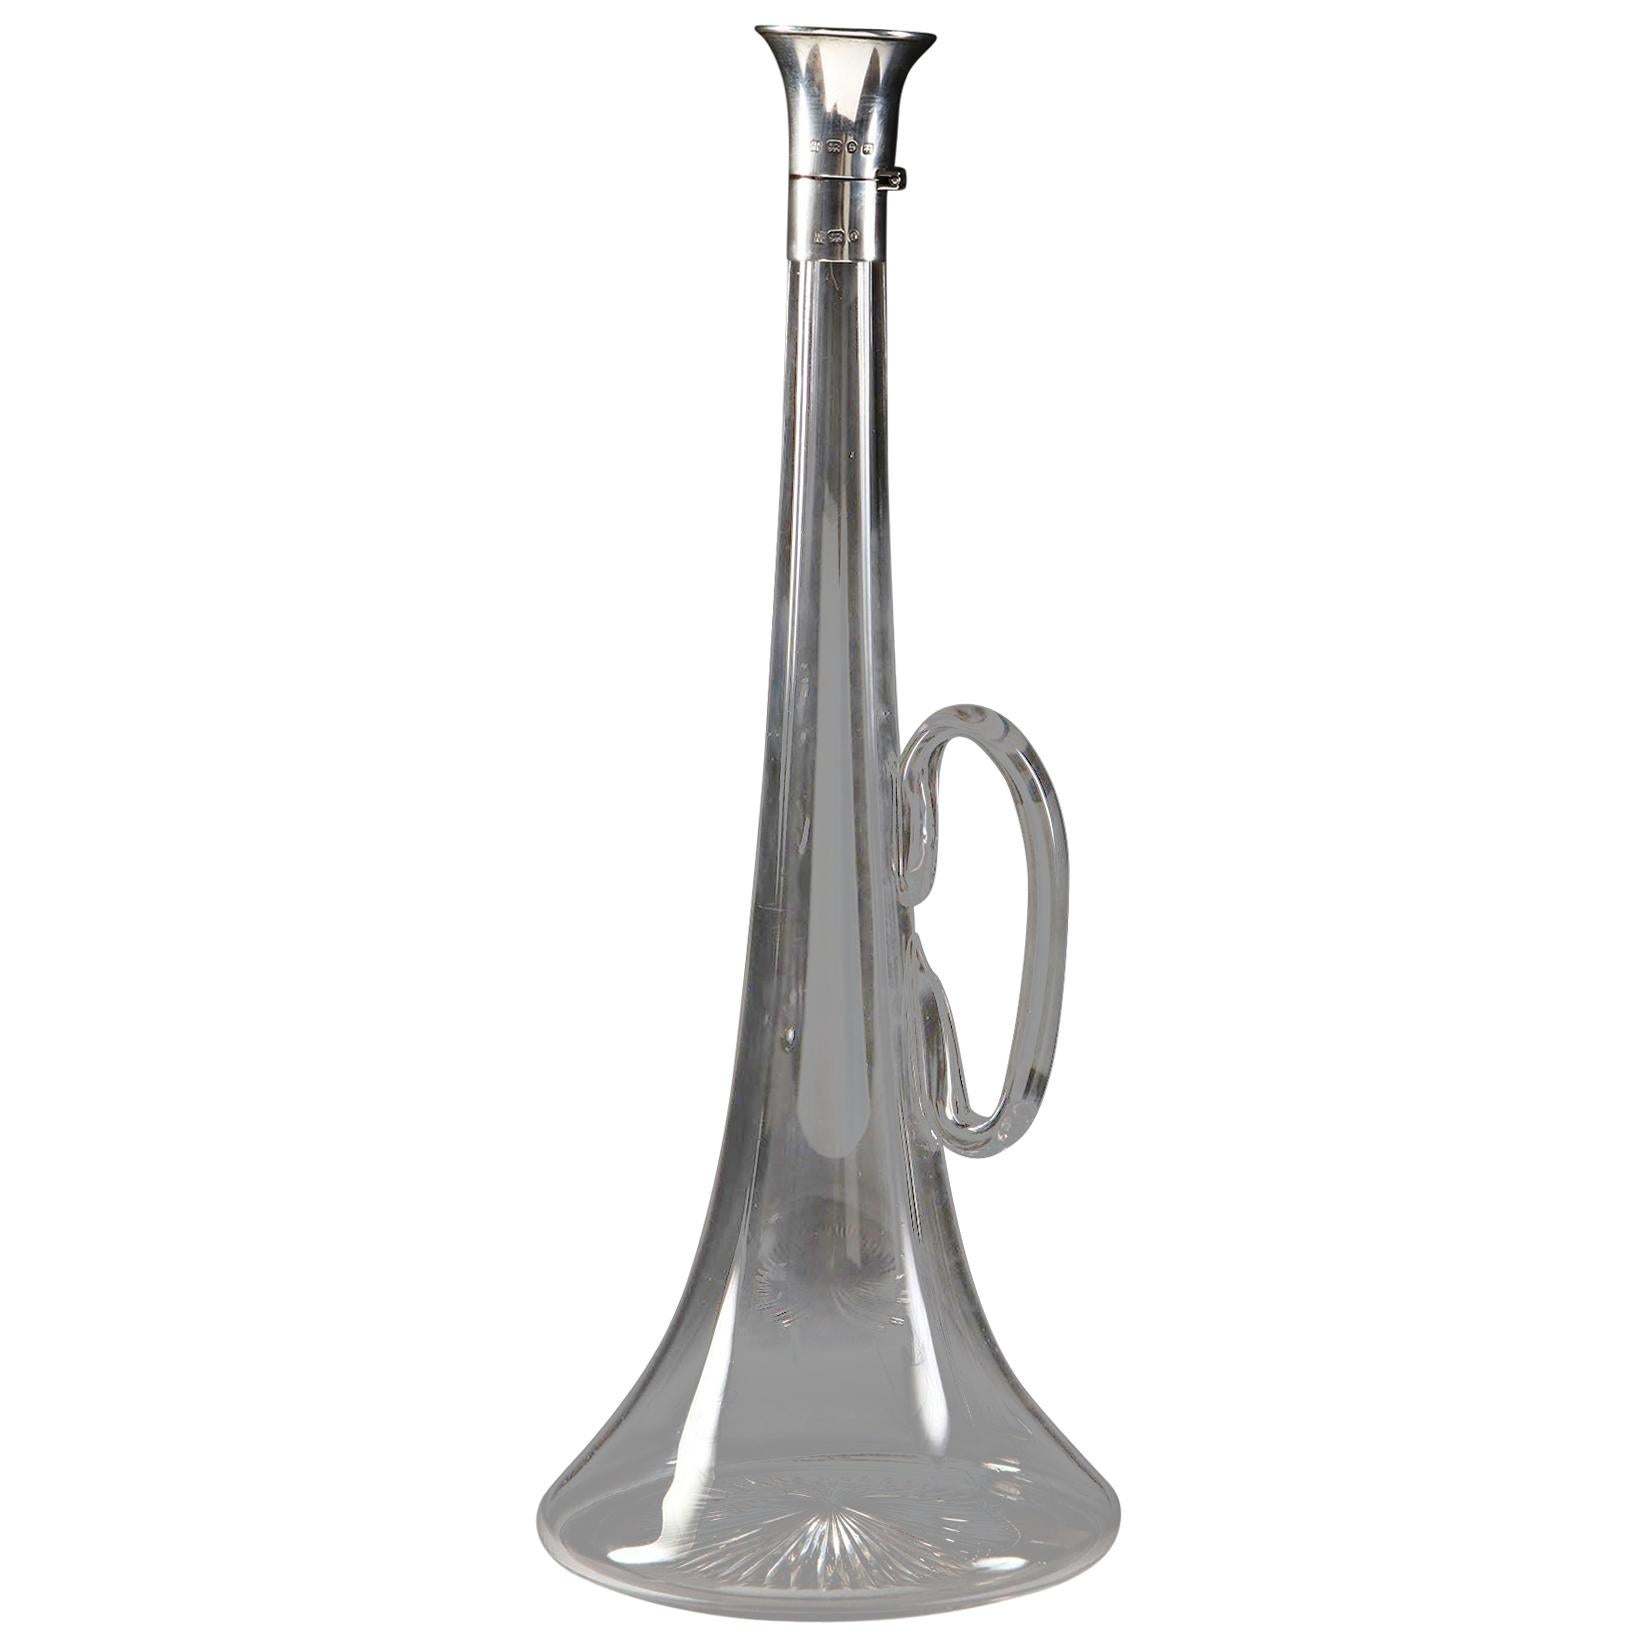 Trumpet Form Hukin and Heath Glass and Silver Claret Jug or Decanter, English